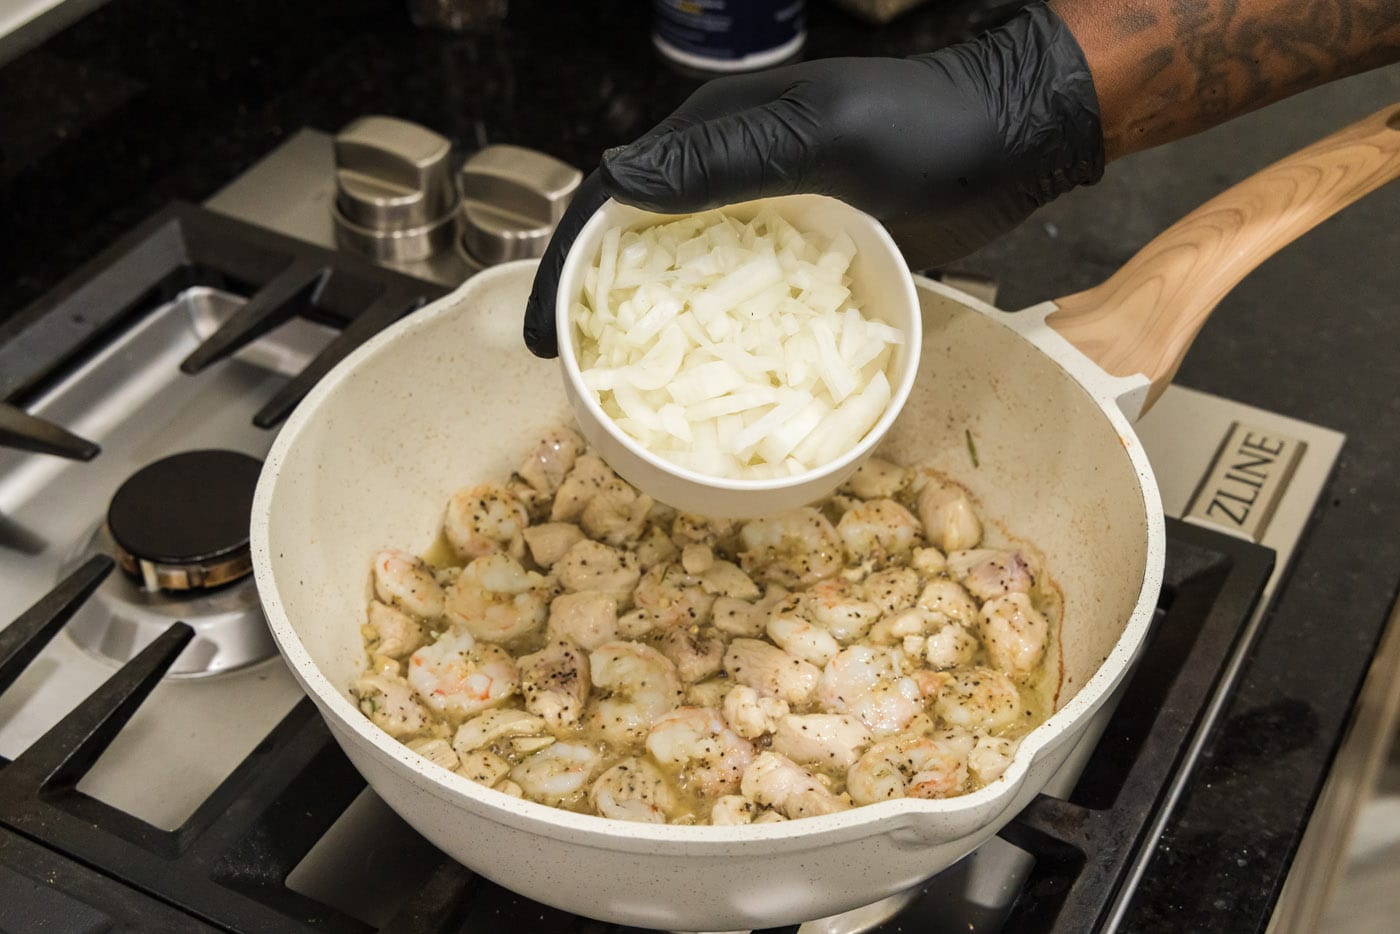 Hand adding chopped onion to skillet with chicken and shrimp mixture